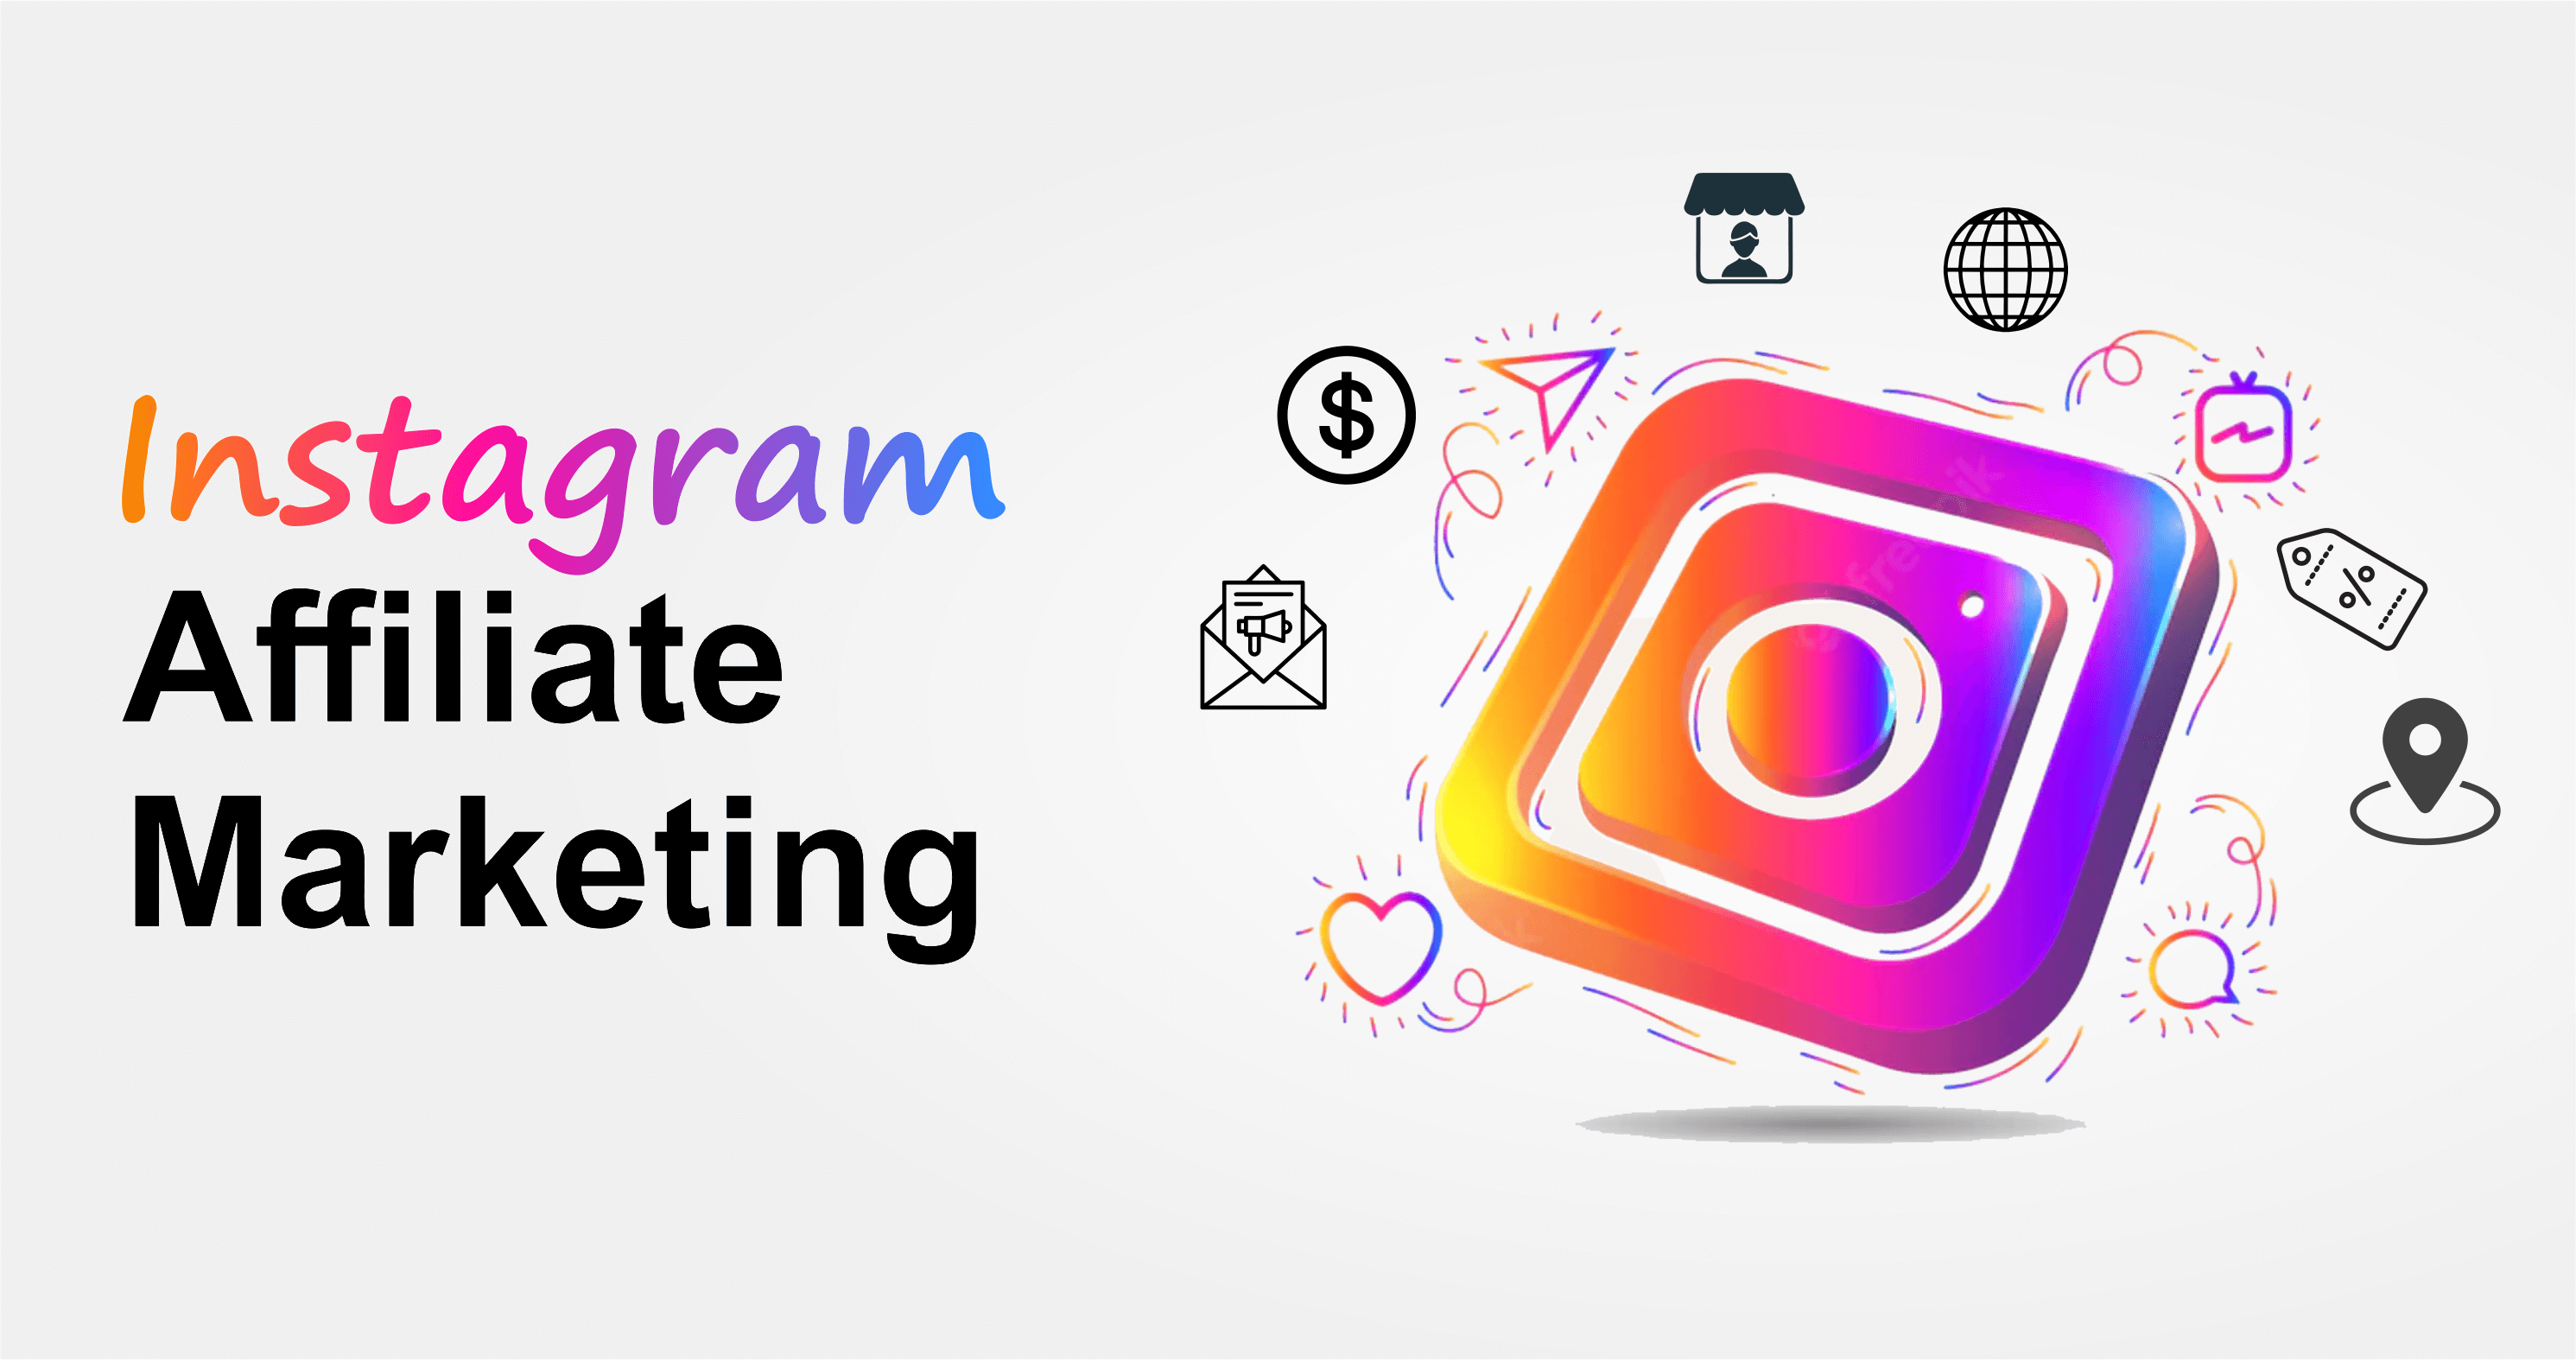 How to Make Money from Instagram